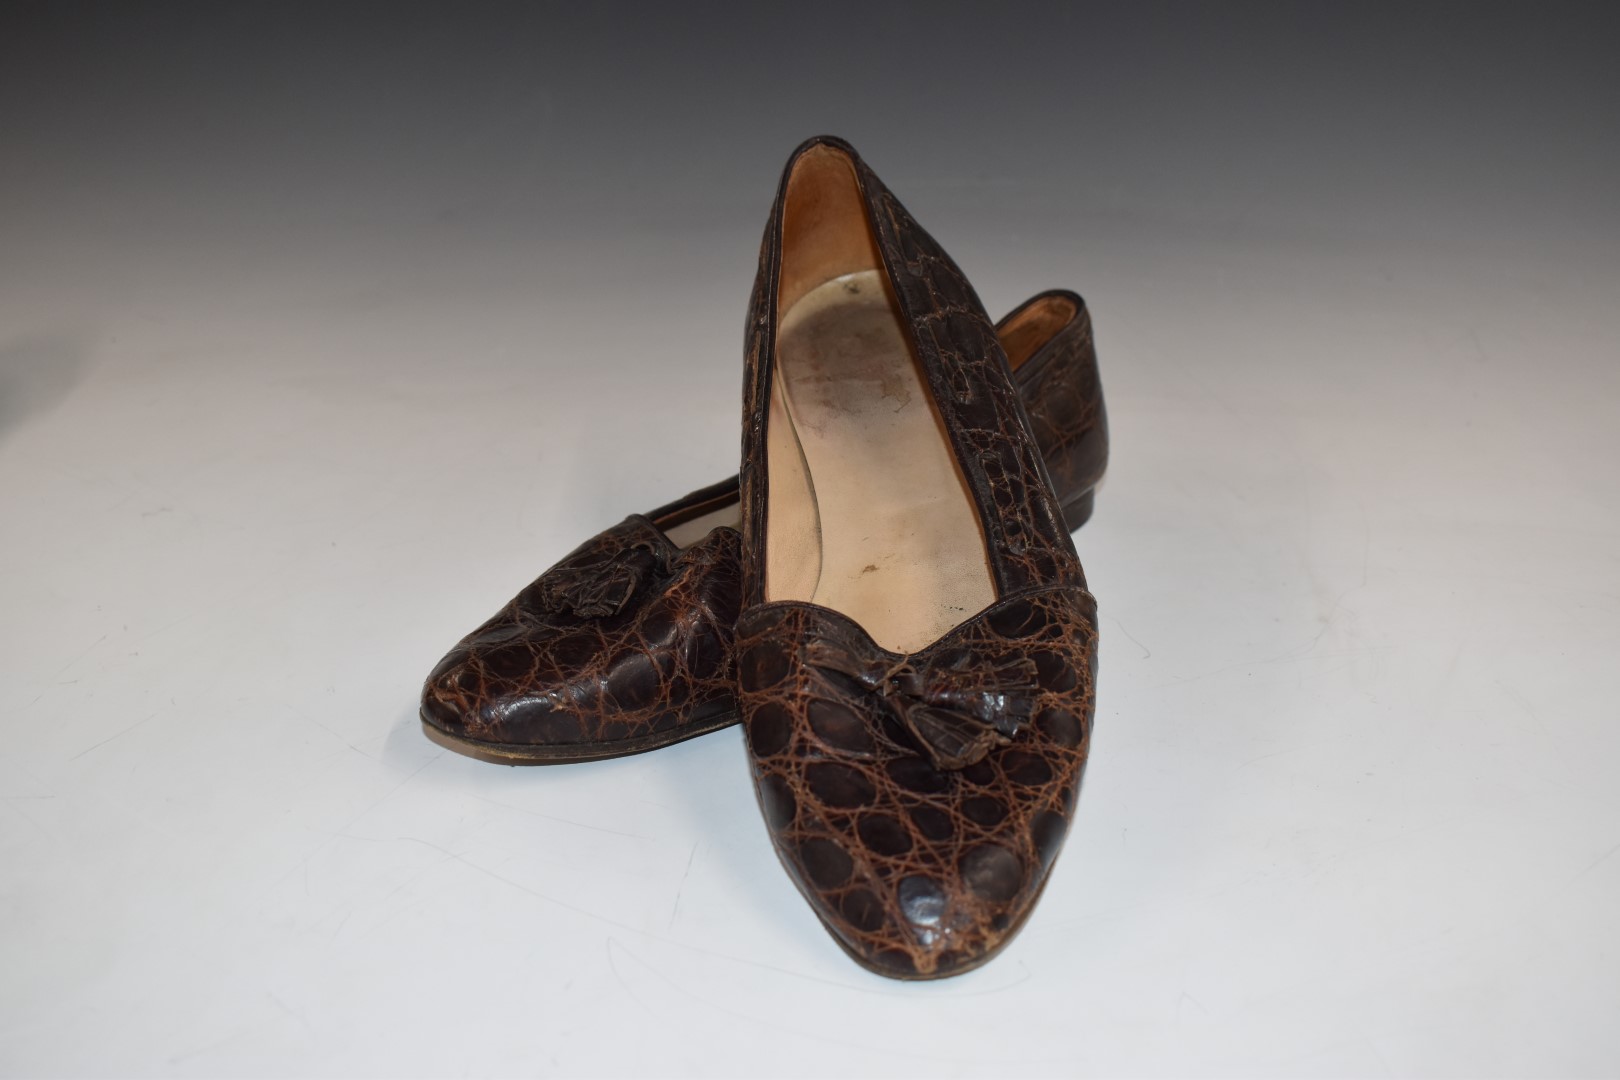 Two pairs of Ralph Lauren ladies shoes and a pair of Italian alligator skin loafers, all size 7 - Image 4 of 7